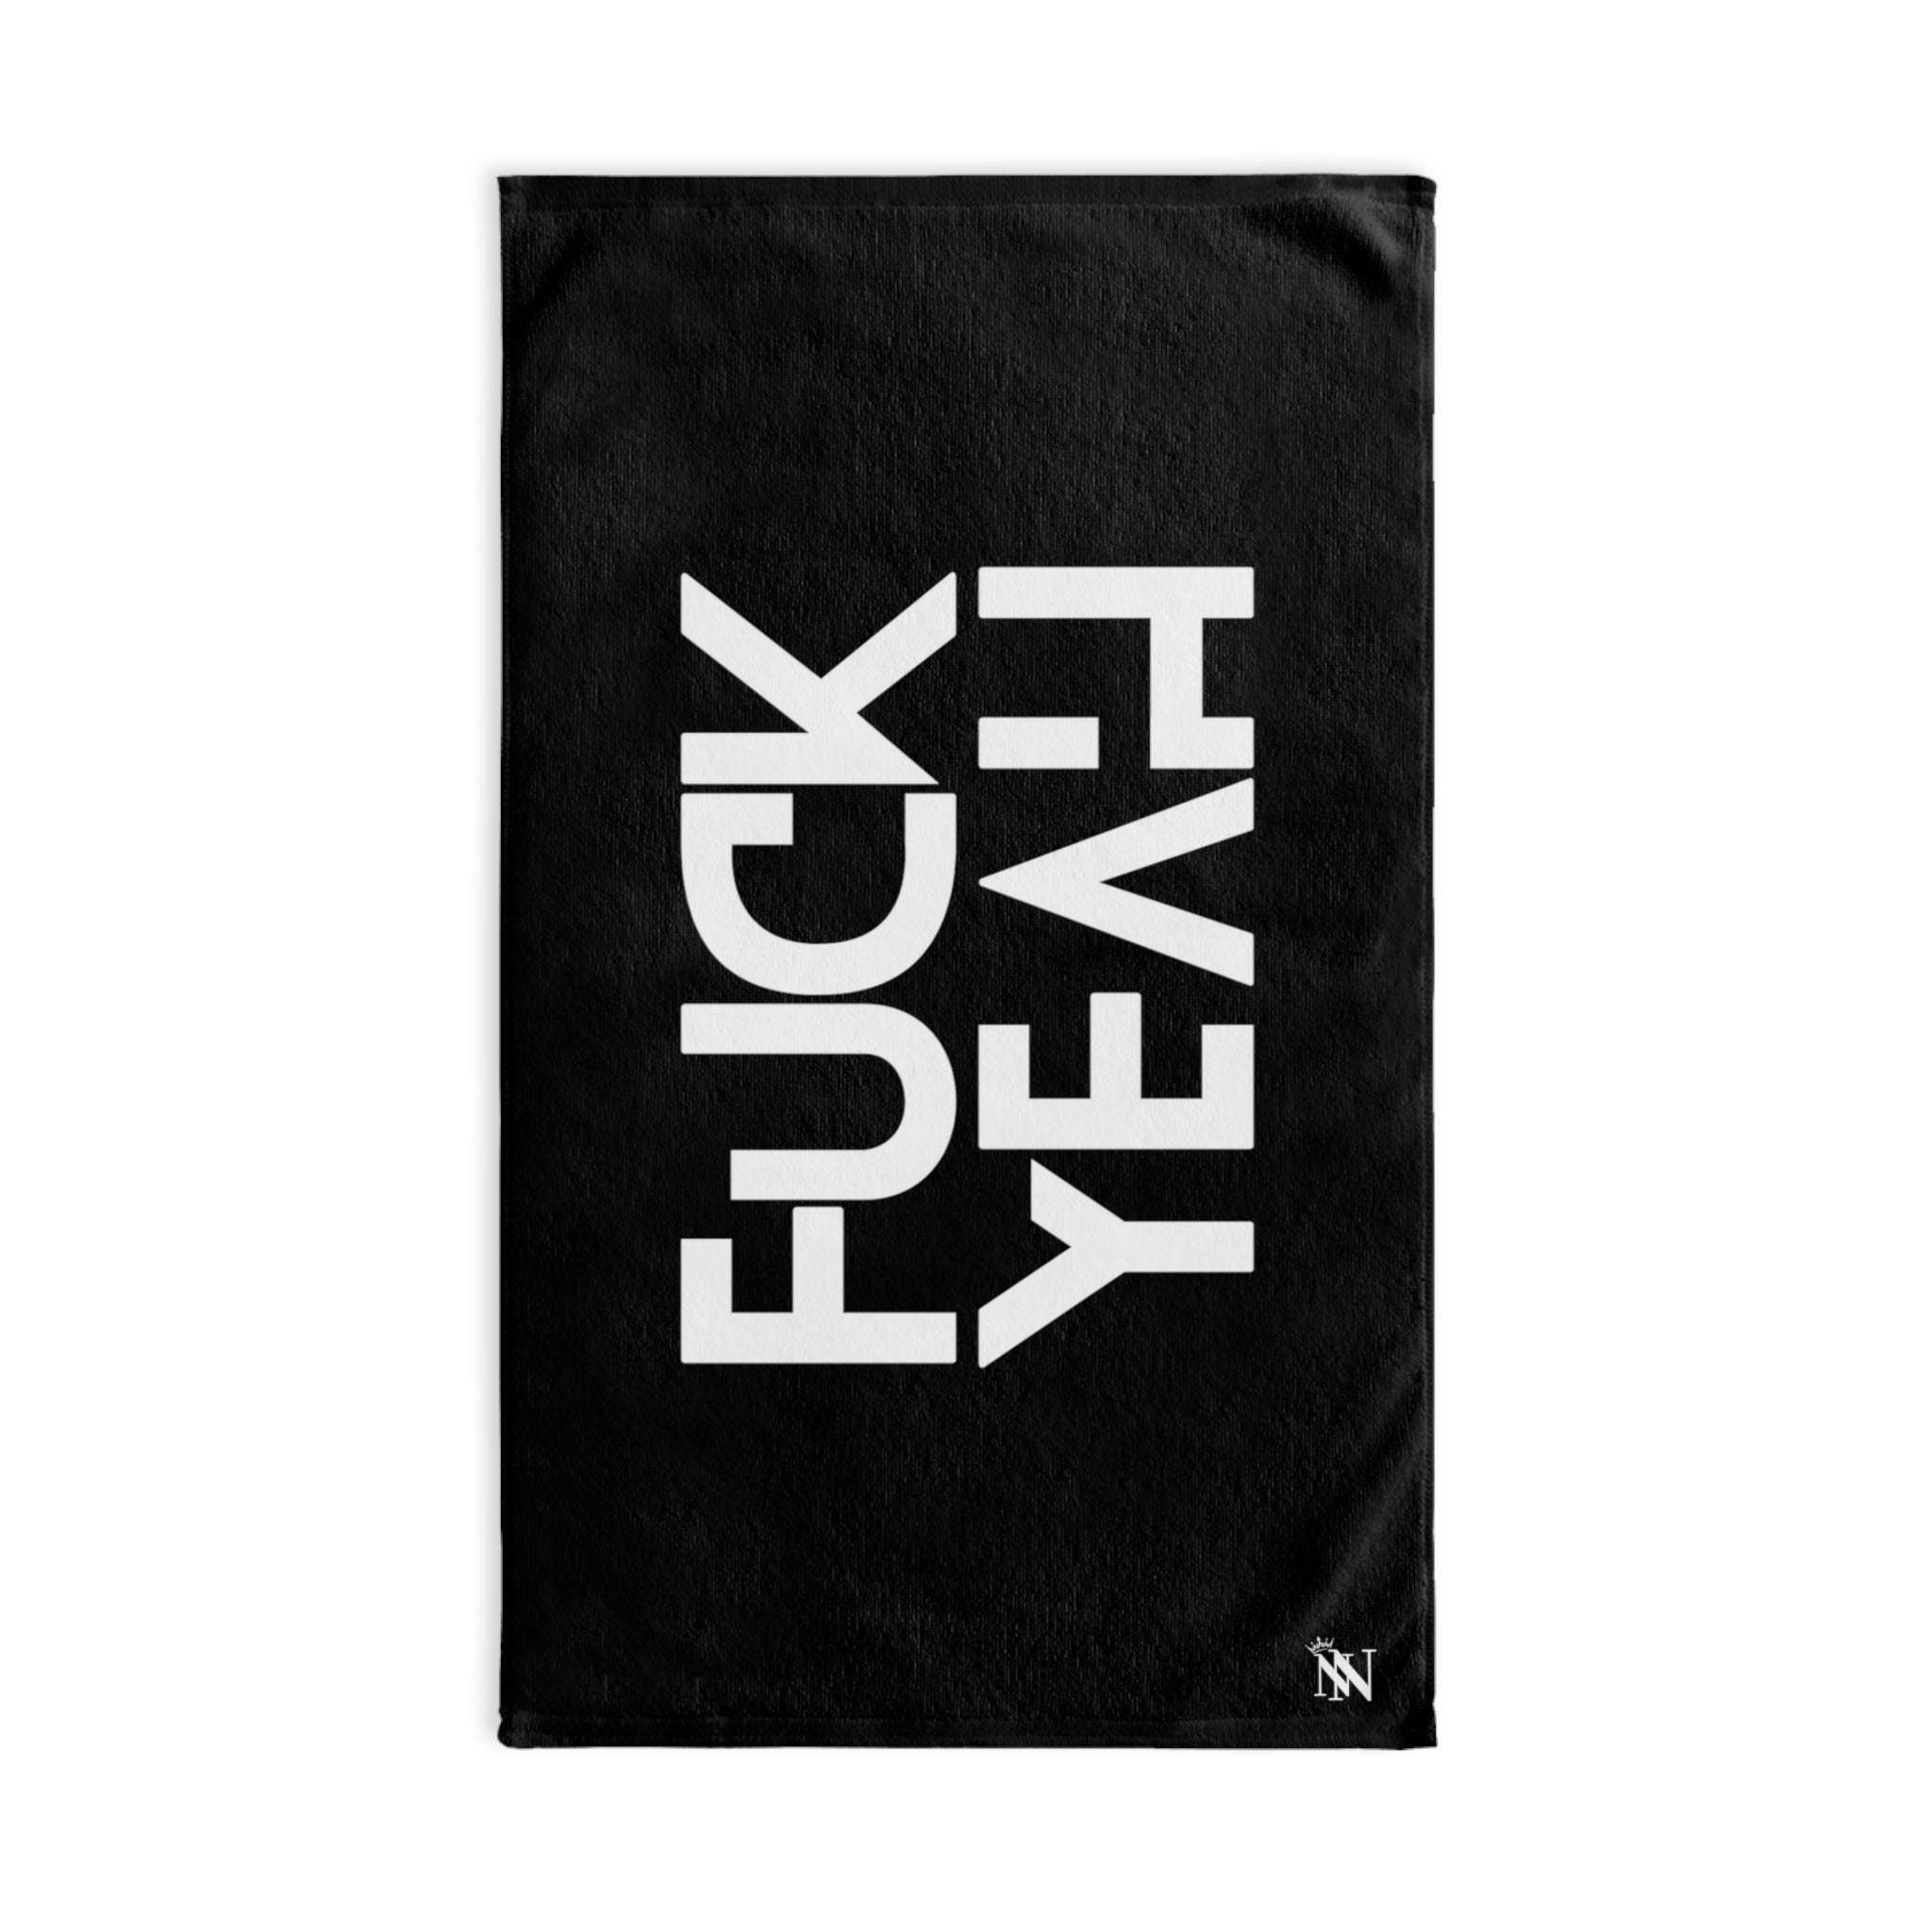 Yeah F*ck YesBlack | Sexy Gifts for Boyfriend, Funny Towel Romantic Gift for Wedding Couple Fiance First Year 2nd Anniversary Valentines, Party Gag Gifts, Joke Humor Cloth for Husband Men BF NECTAR NAPKINS